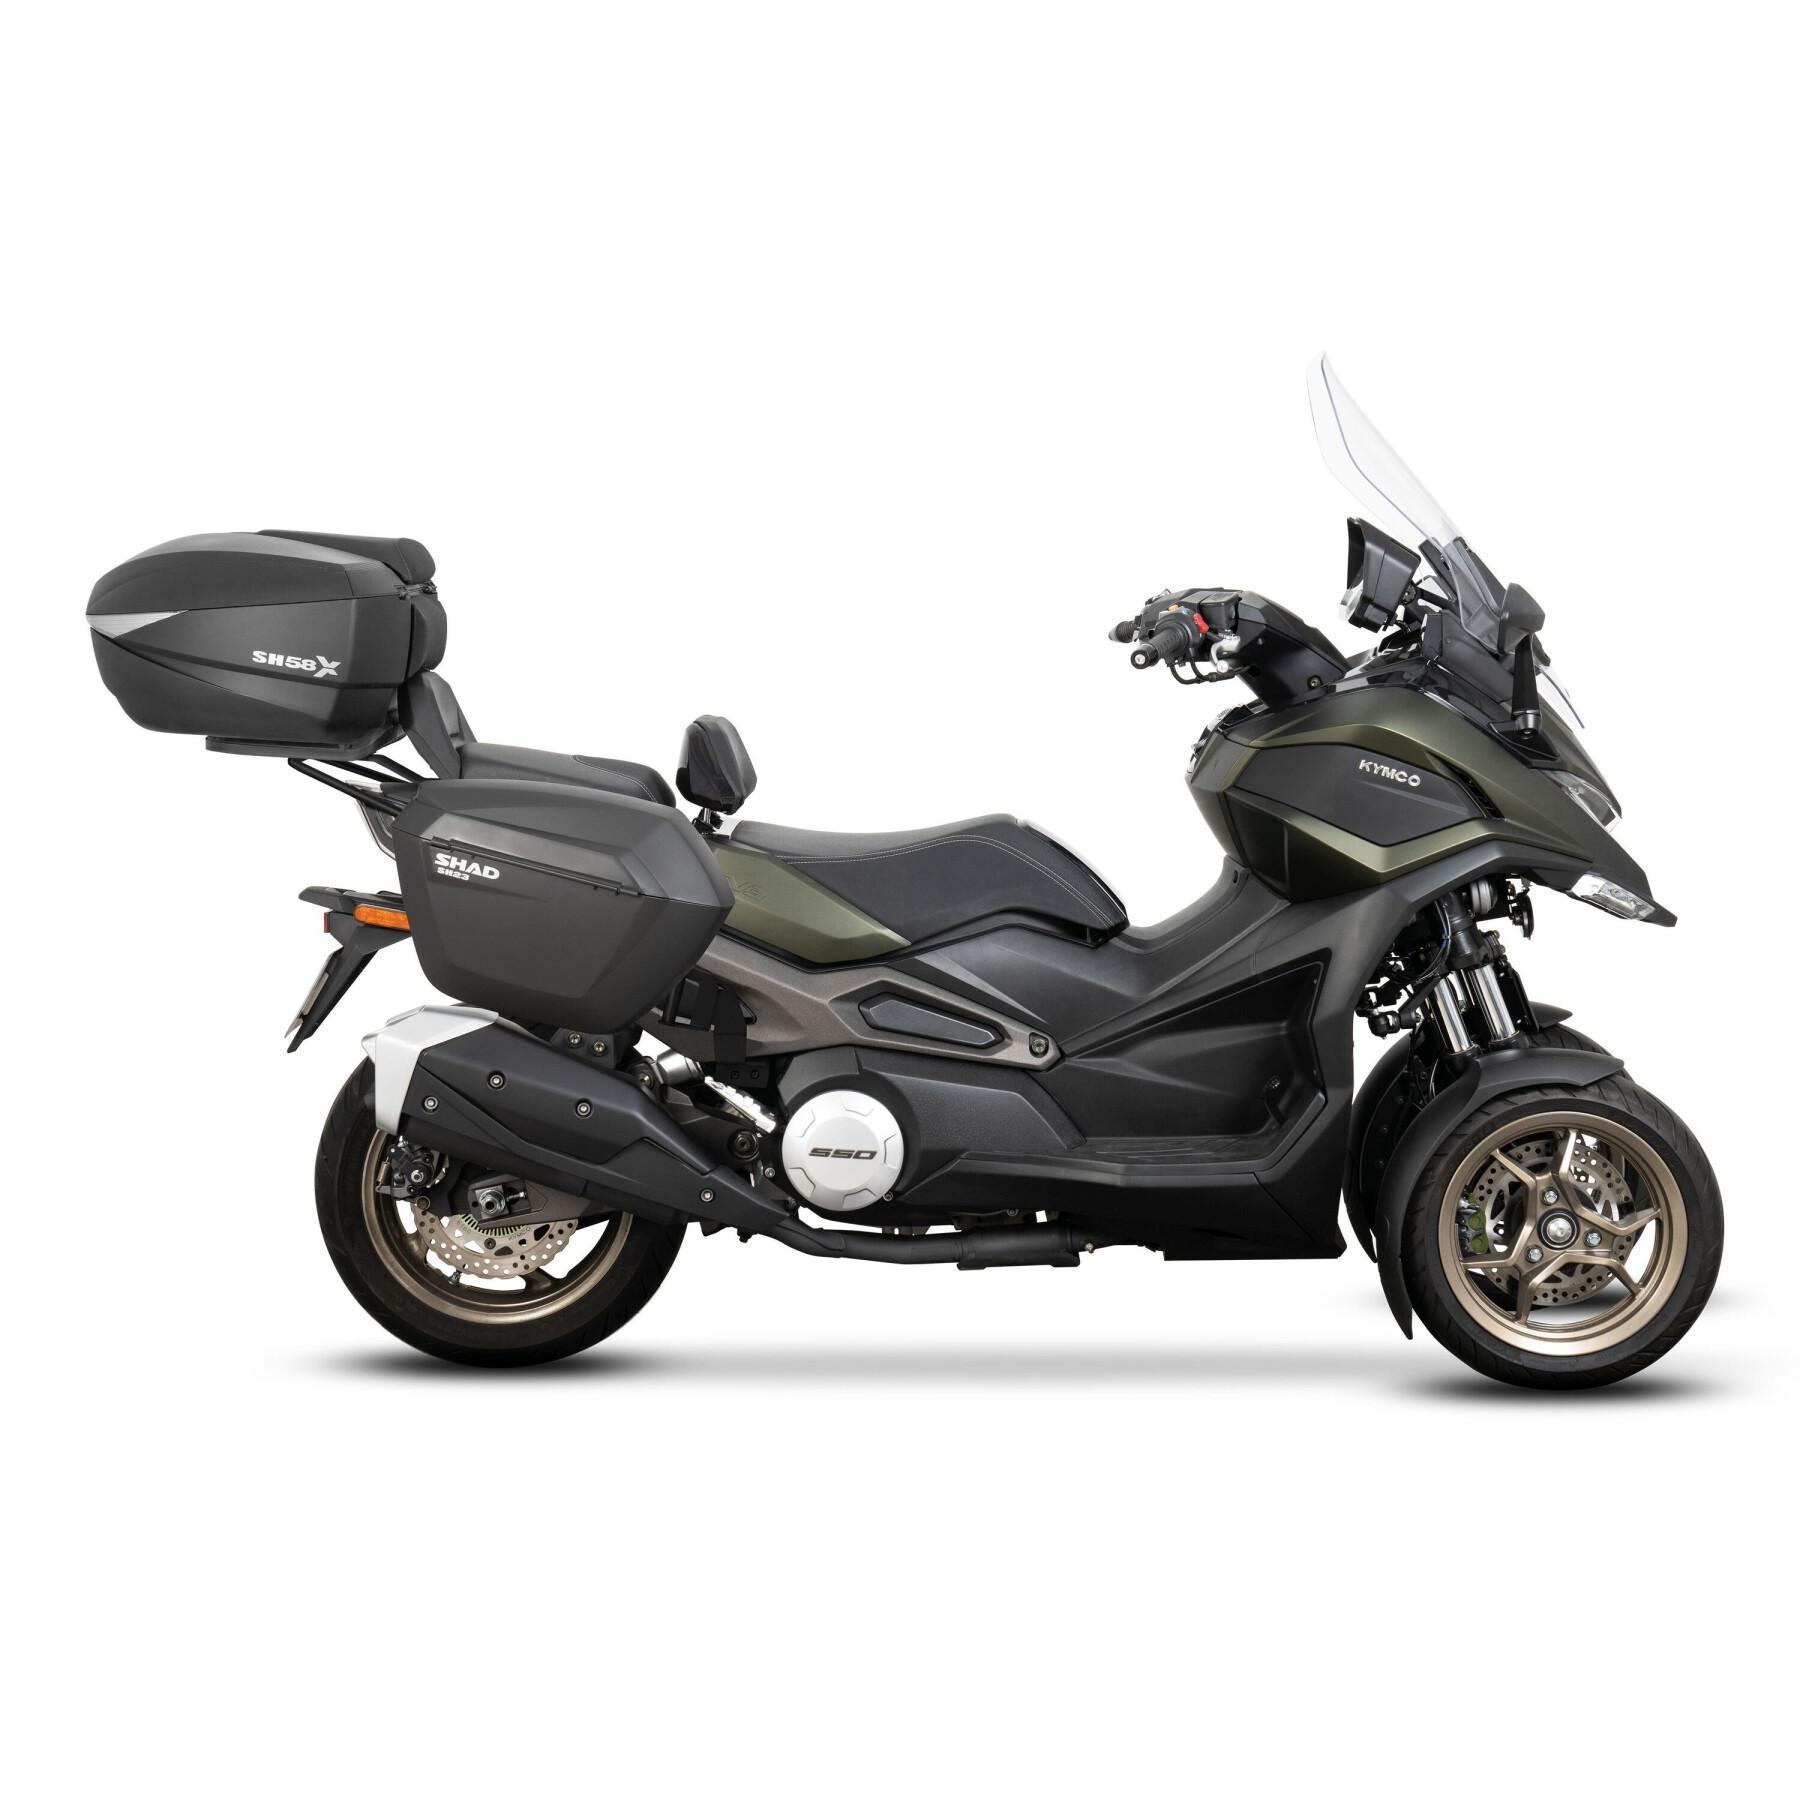 Support valises latérales Shad 3P System Kymco CV3 550